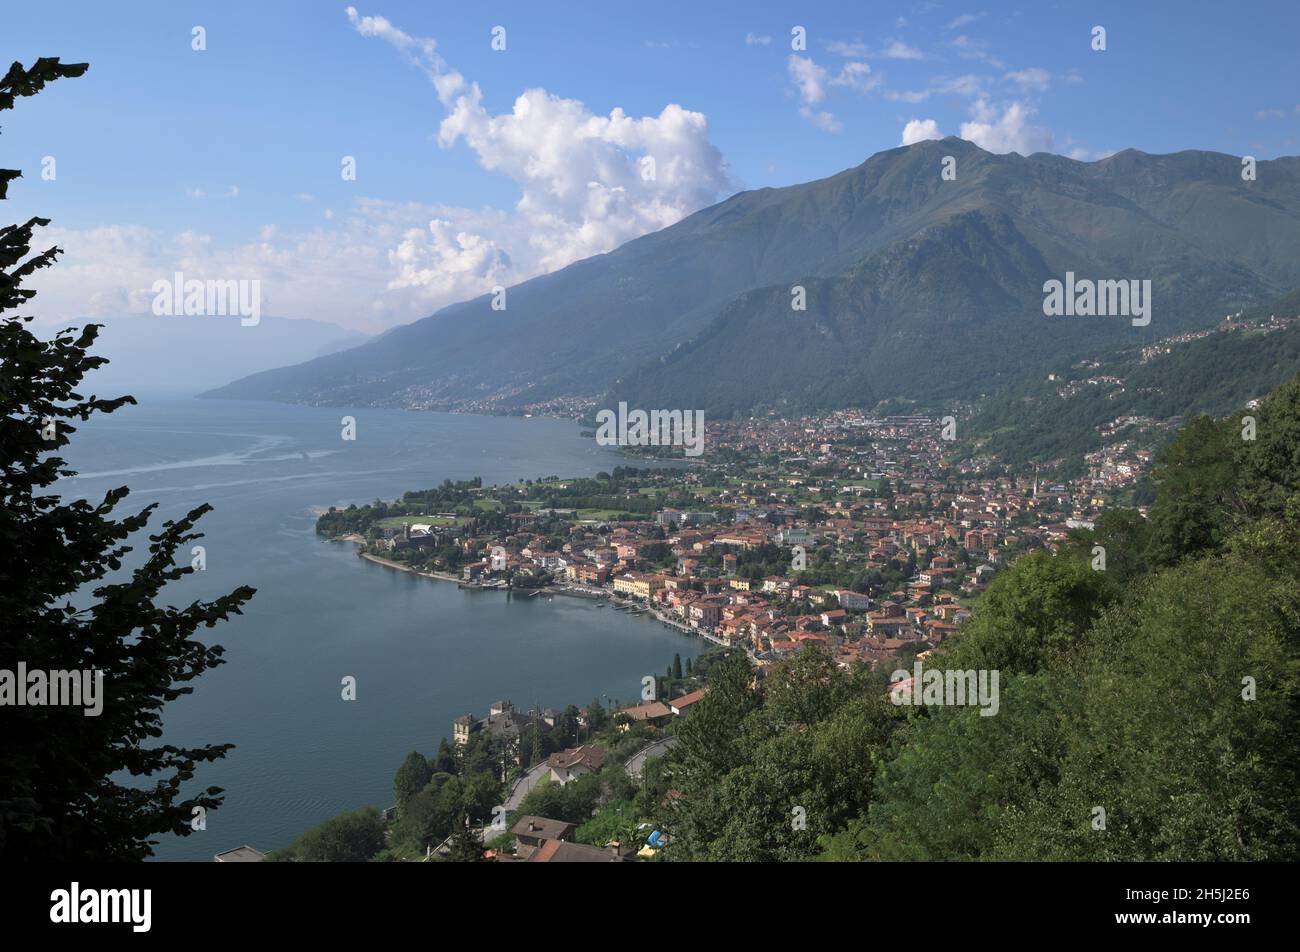 Misty view of Domaso and Gravedona at lake Como from an elevated viewpoint, Domaso, Italy Stock Photo